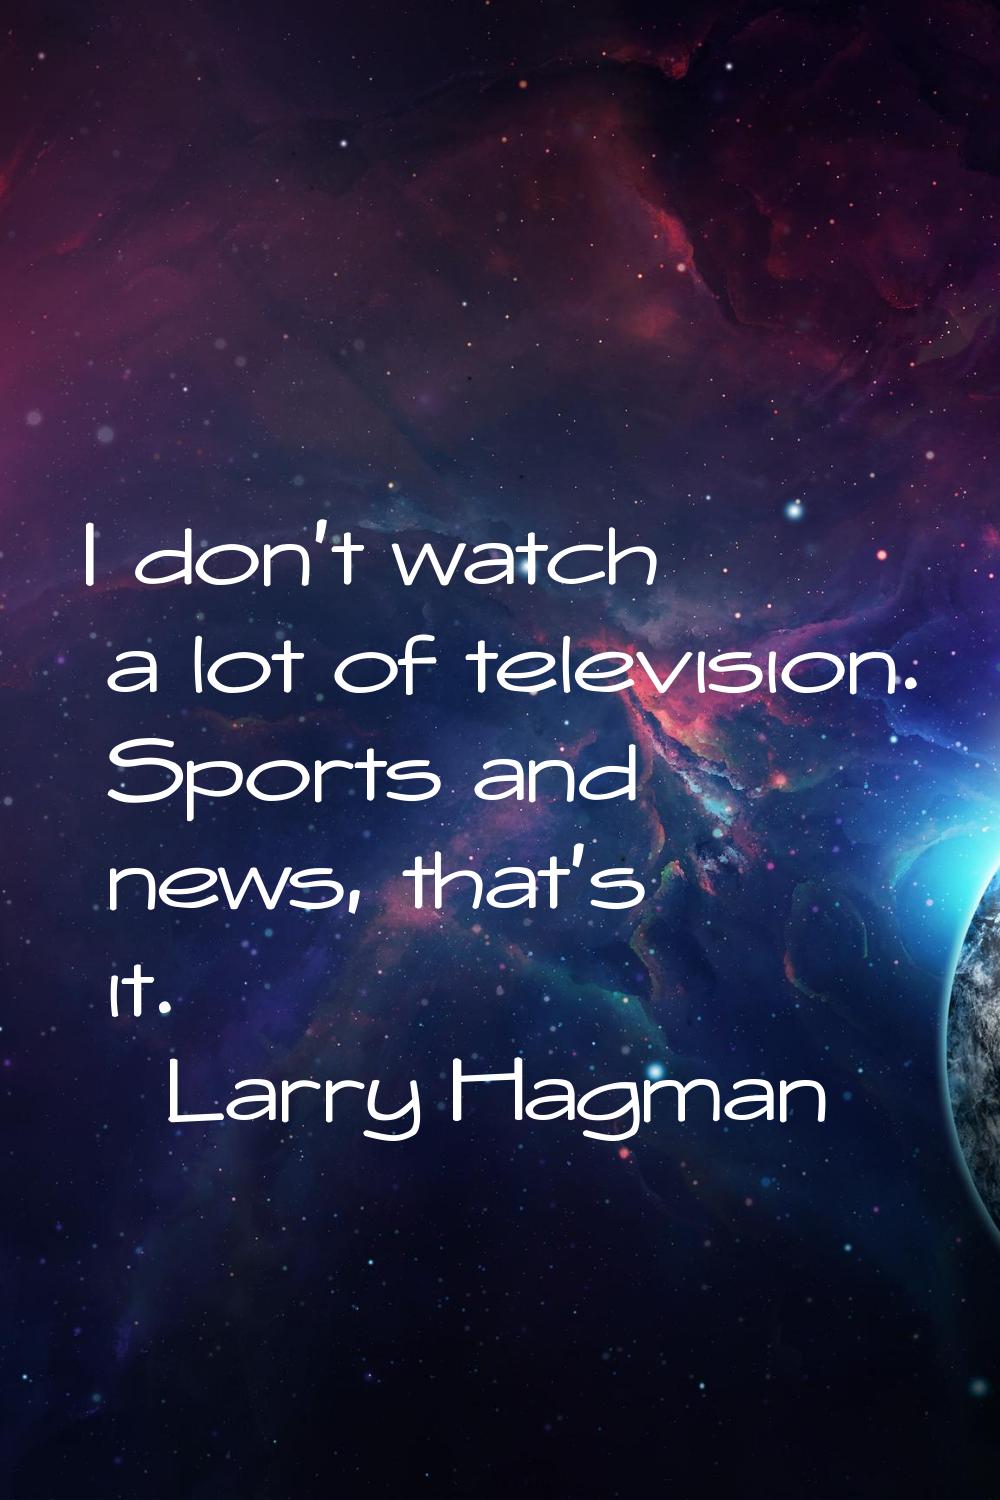 I don't watch a lot of television. Sports and news, that's it.